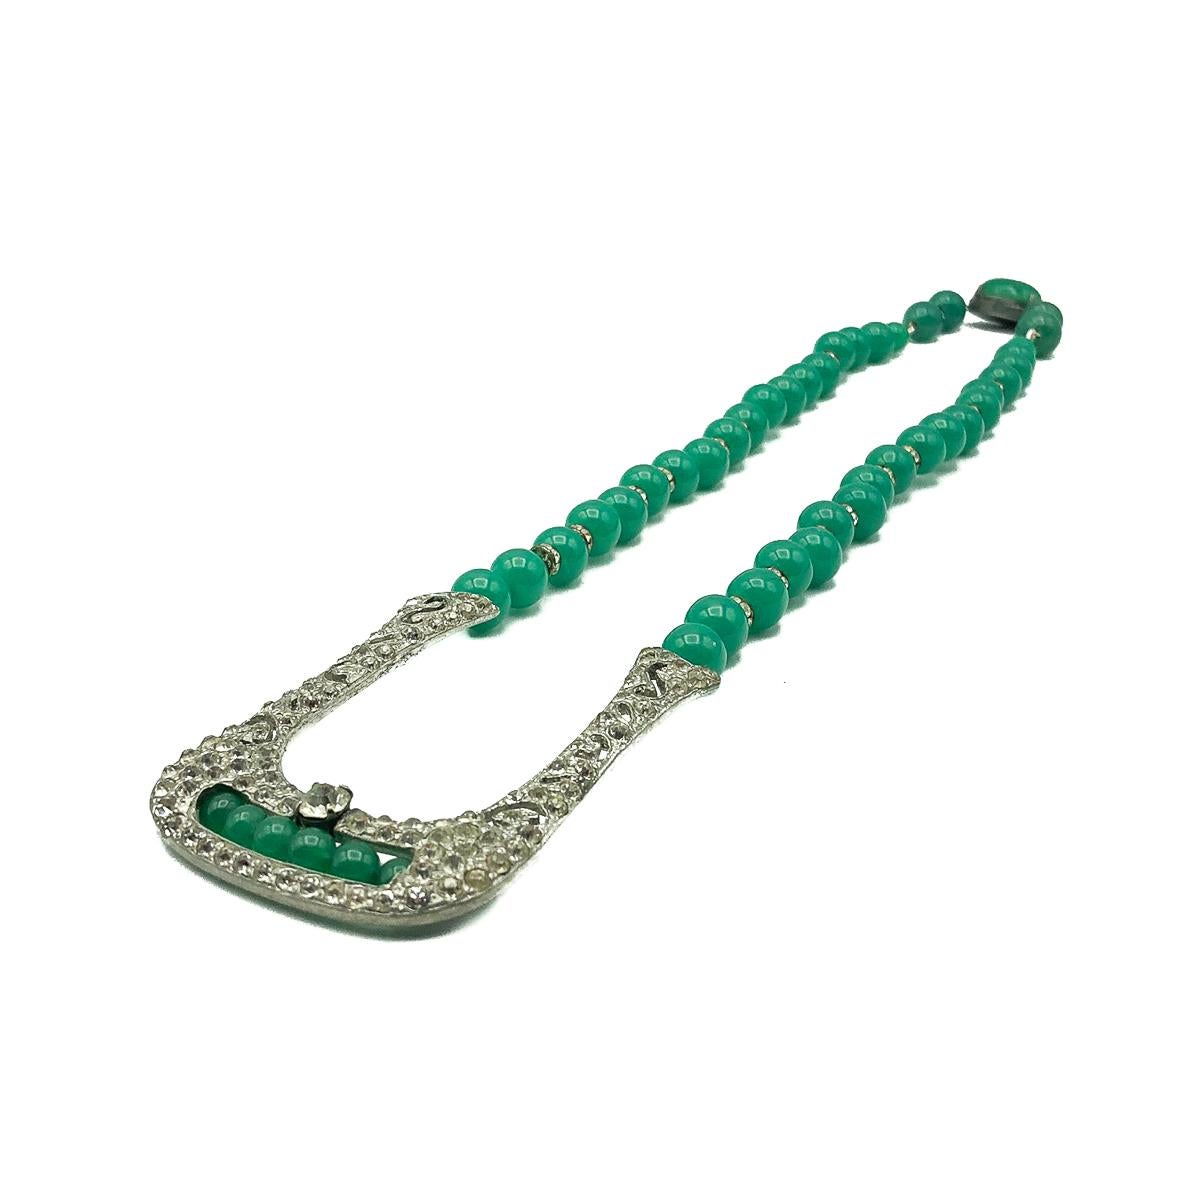 green chalcedony necklace